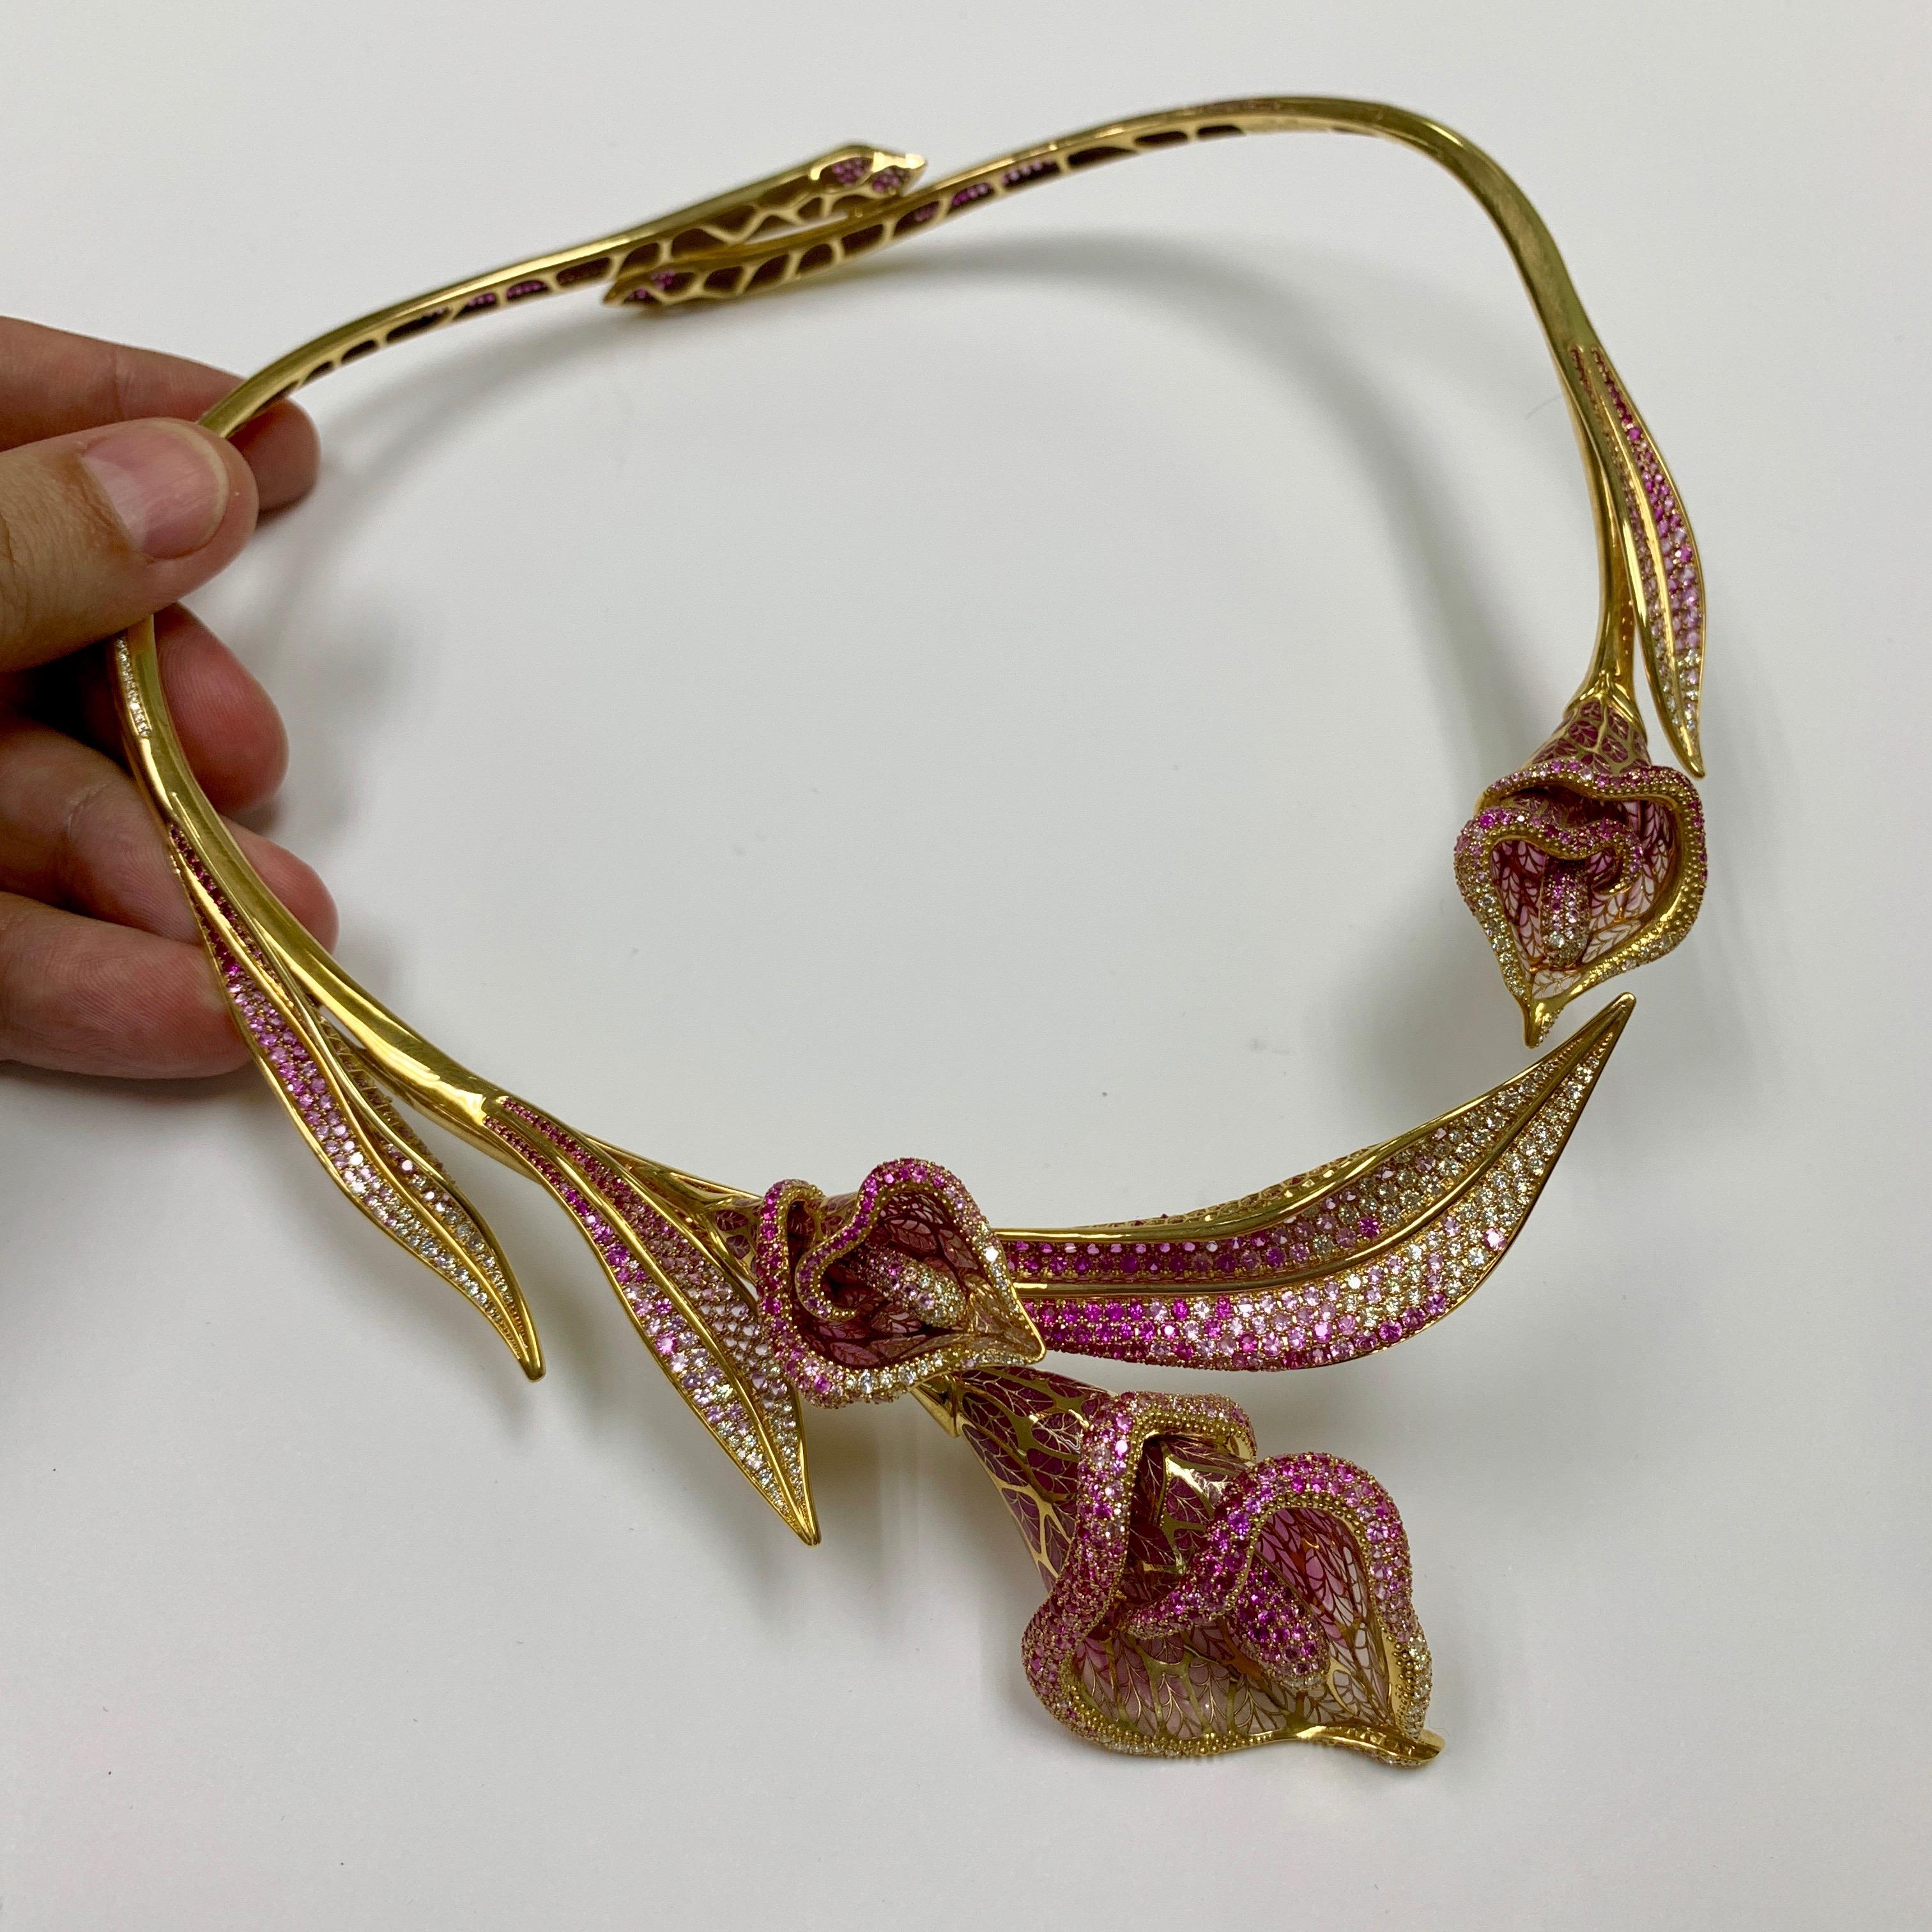 Pink Sapphire Diamonds Colored Enamel 18 Karat Yellow Gold Calla Lily Necklace
There is a legend that one girl wanted to marry the cruel leader of the tribe, she decided to throw herself into the fire from misfortune, but the gods saved her and